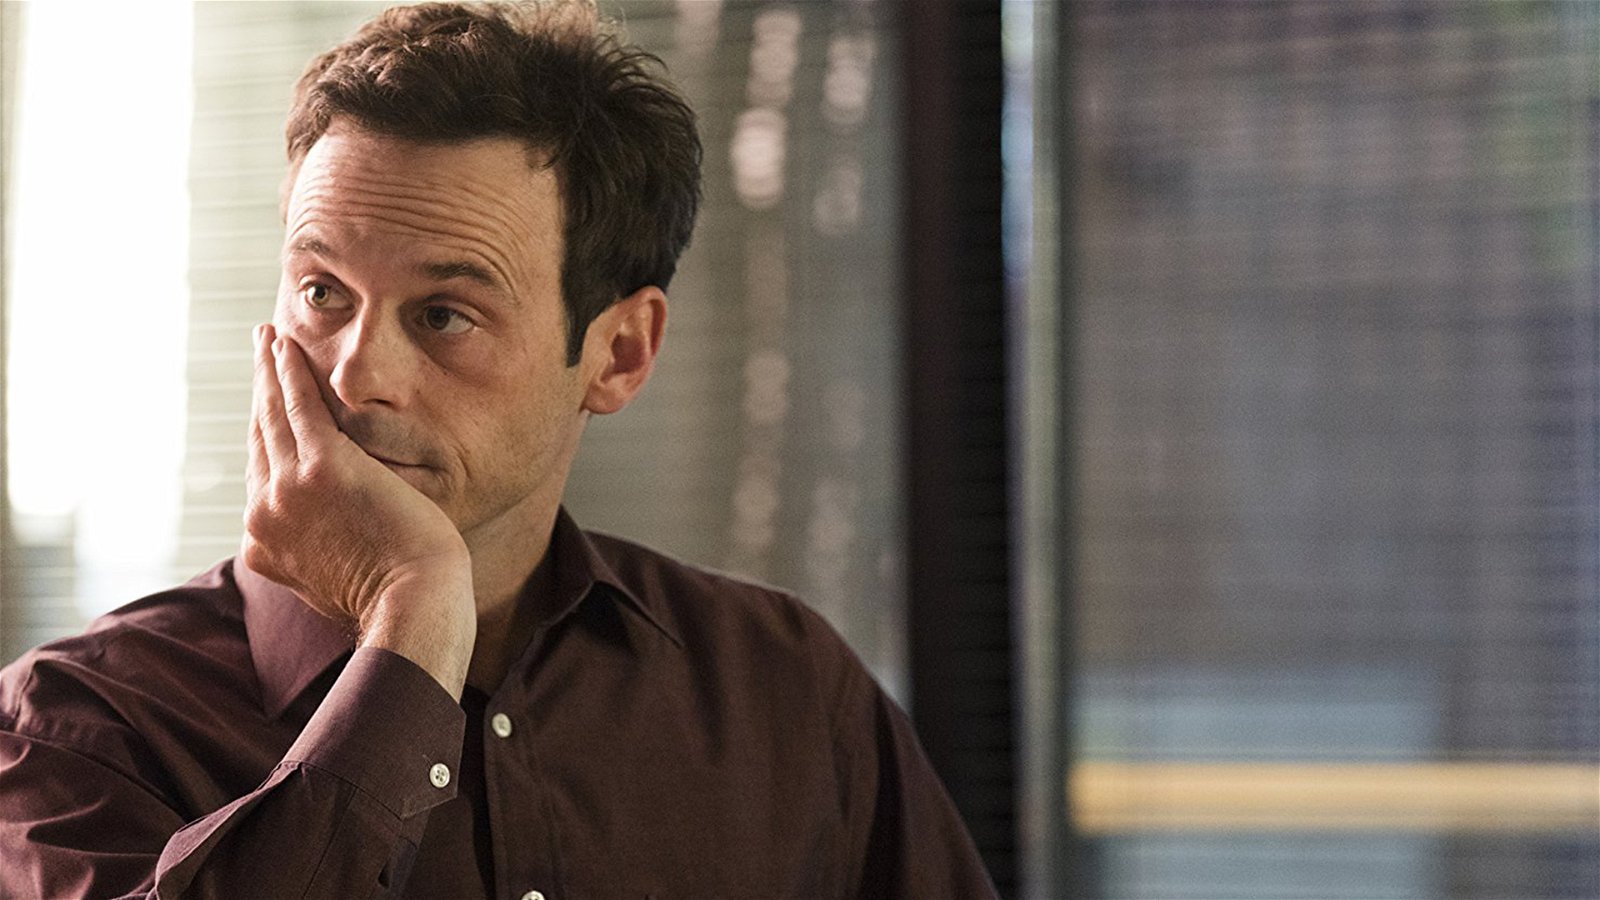 Television, the Internet, and What's Wrong With Social Media : An Interview with Halt and Catch Fire's Scoot McNairy 3